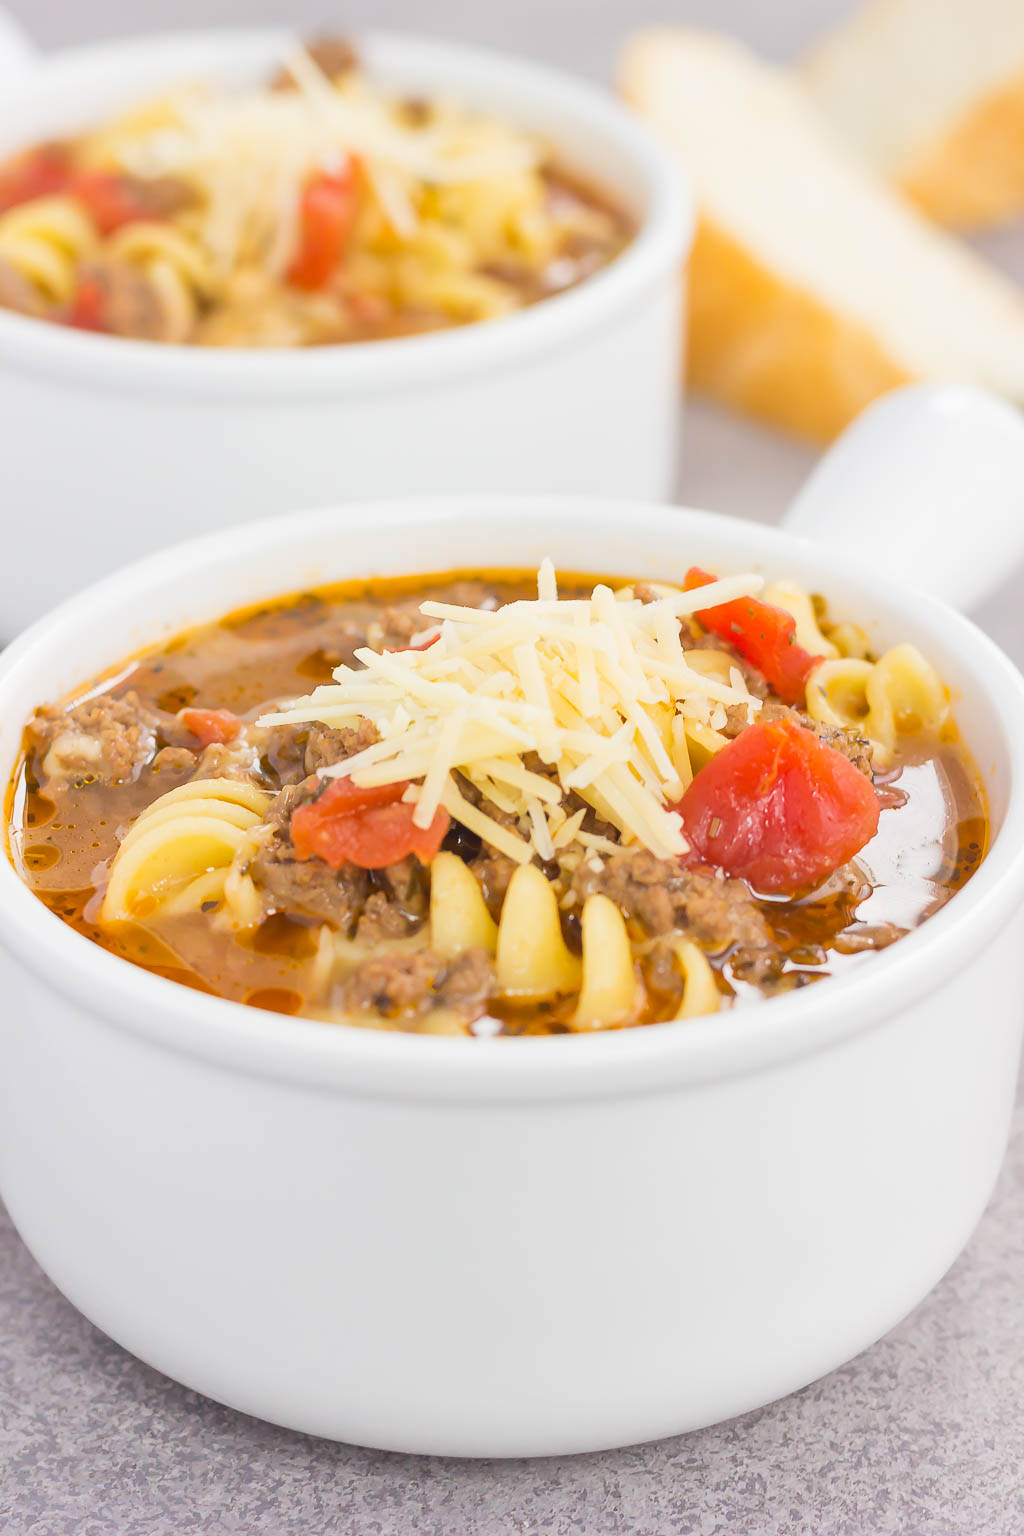 This One Pot Lasagna Soup is tastes just like the classic dish, but without all of the prep work. Everything is tossed into one pot and then simmered until the flavors blend together. Easy to make and full of simple ingredients, this hearty soup will be a meal-time winner all year long!